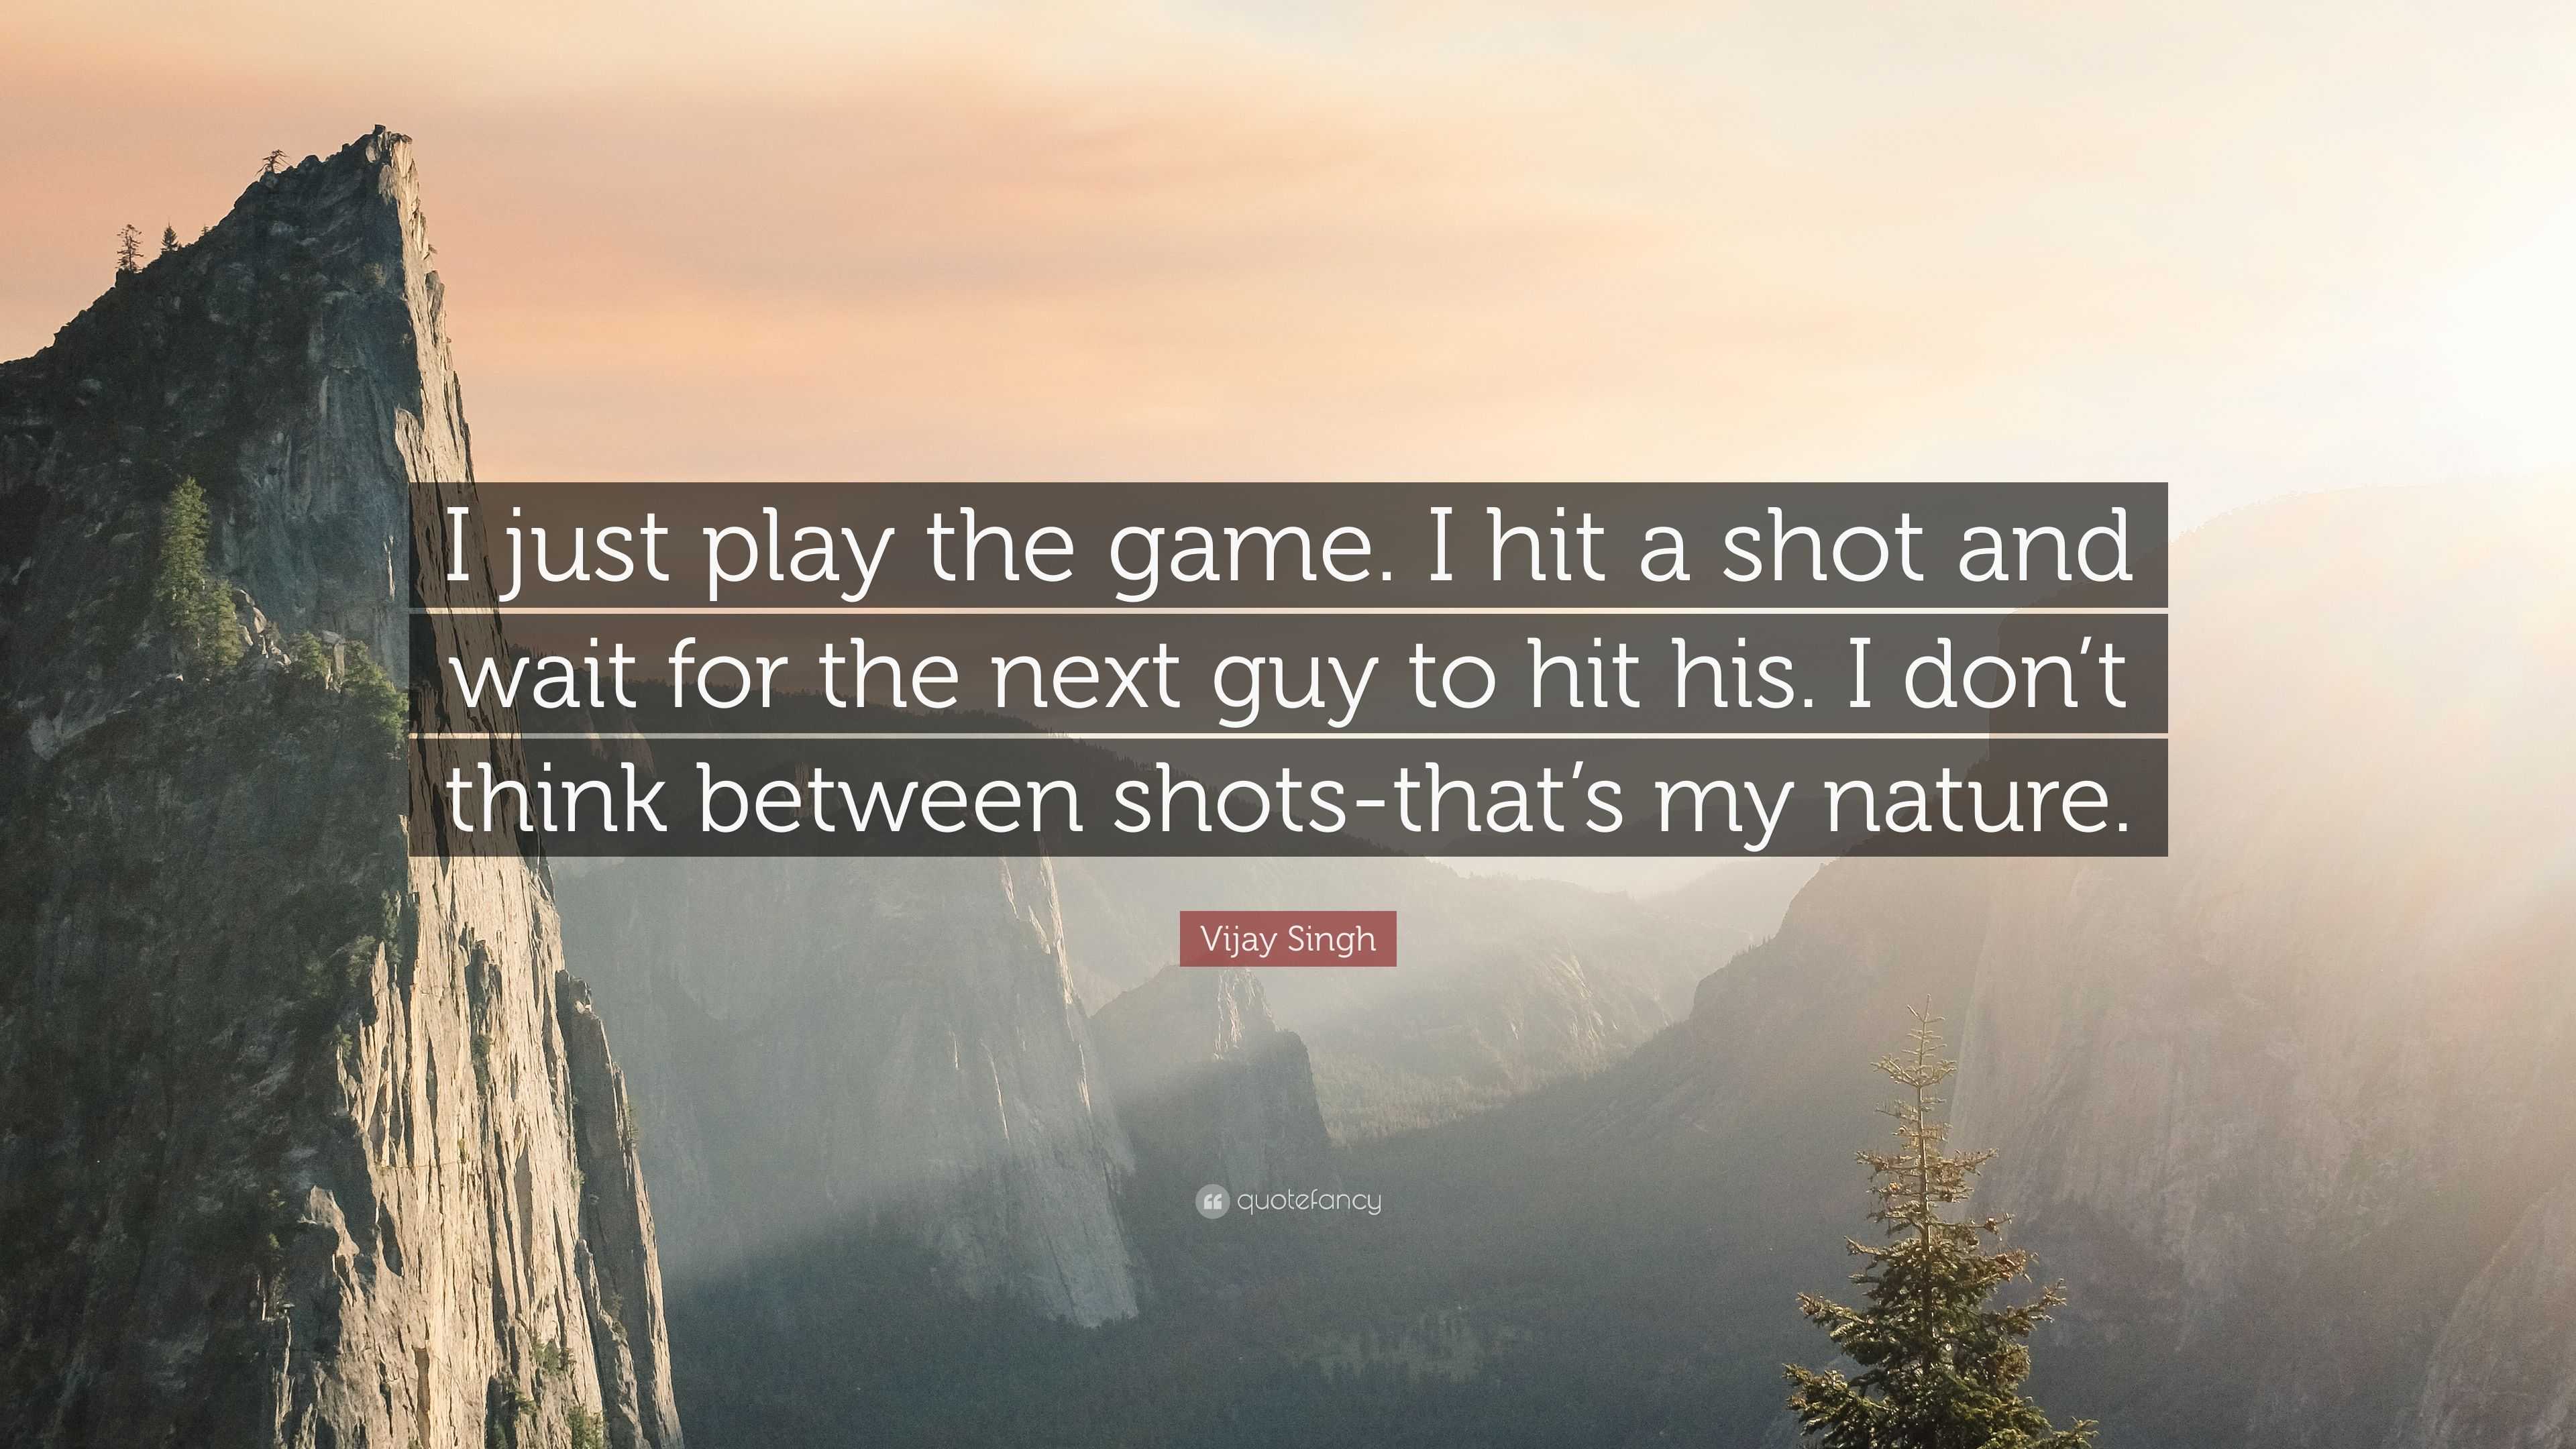 Quotes about Just playing the game (51 quotes)